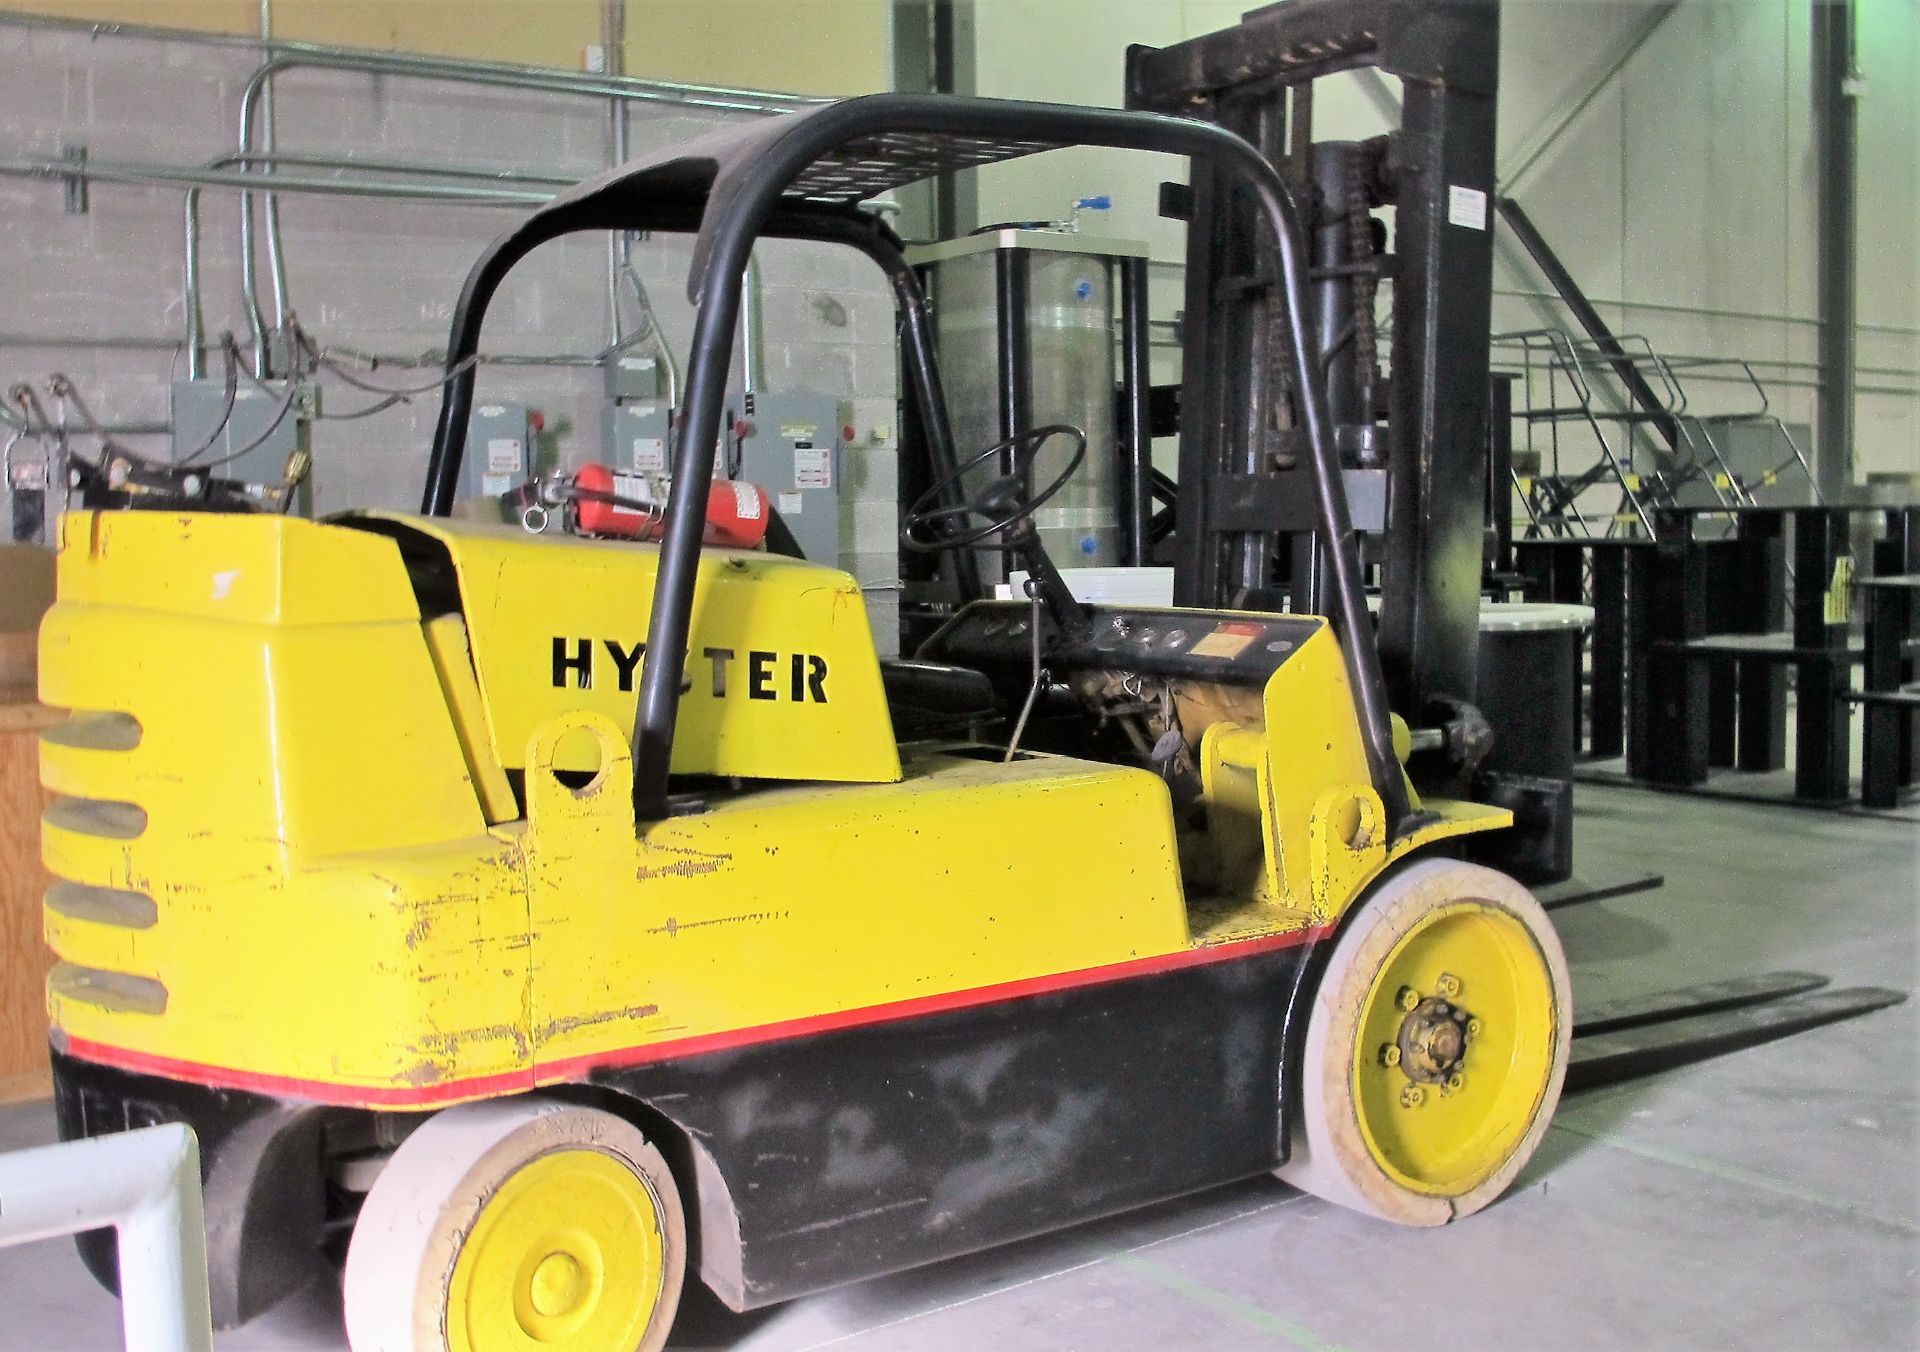 HYSTER 150A PROPANE FORKLIFT, 15,000LB CAP., 148" MAX LIFT, 72" FORKS (SUBJECT TO LATE REMOVAL, PICK - Image 2 of 3